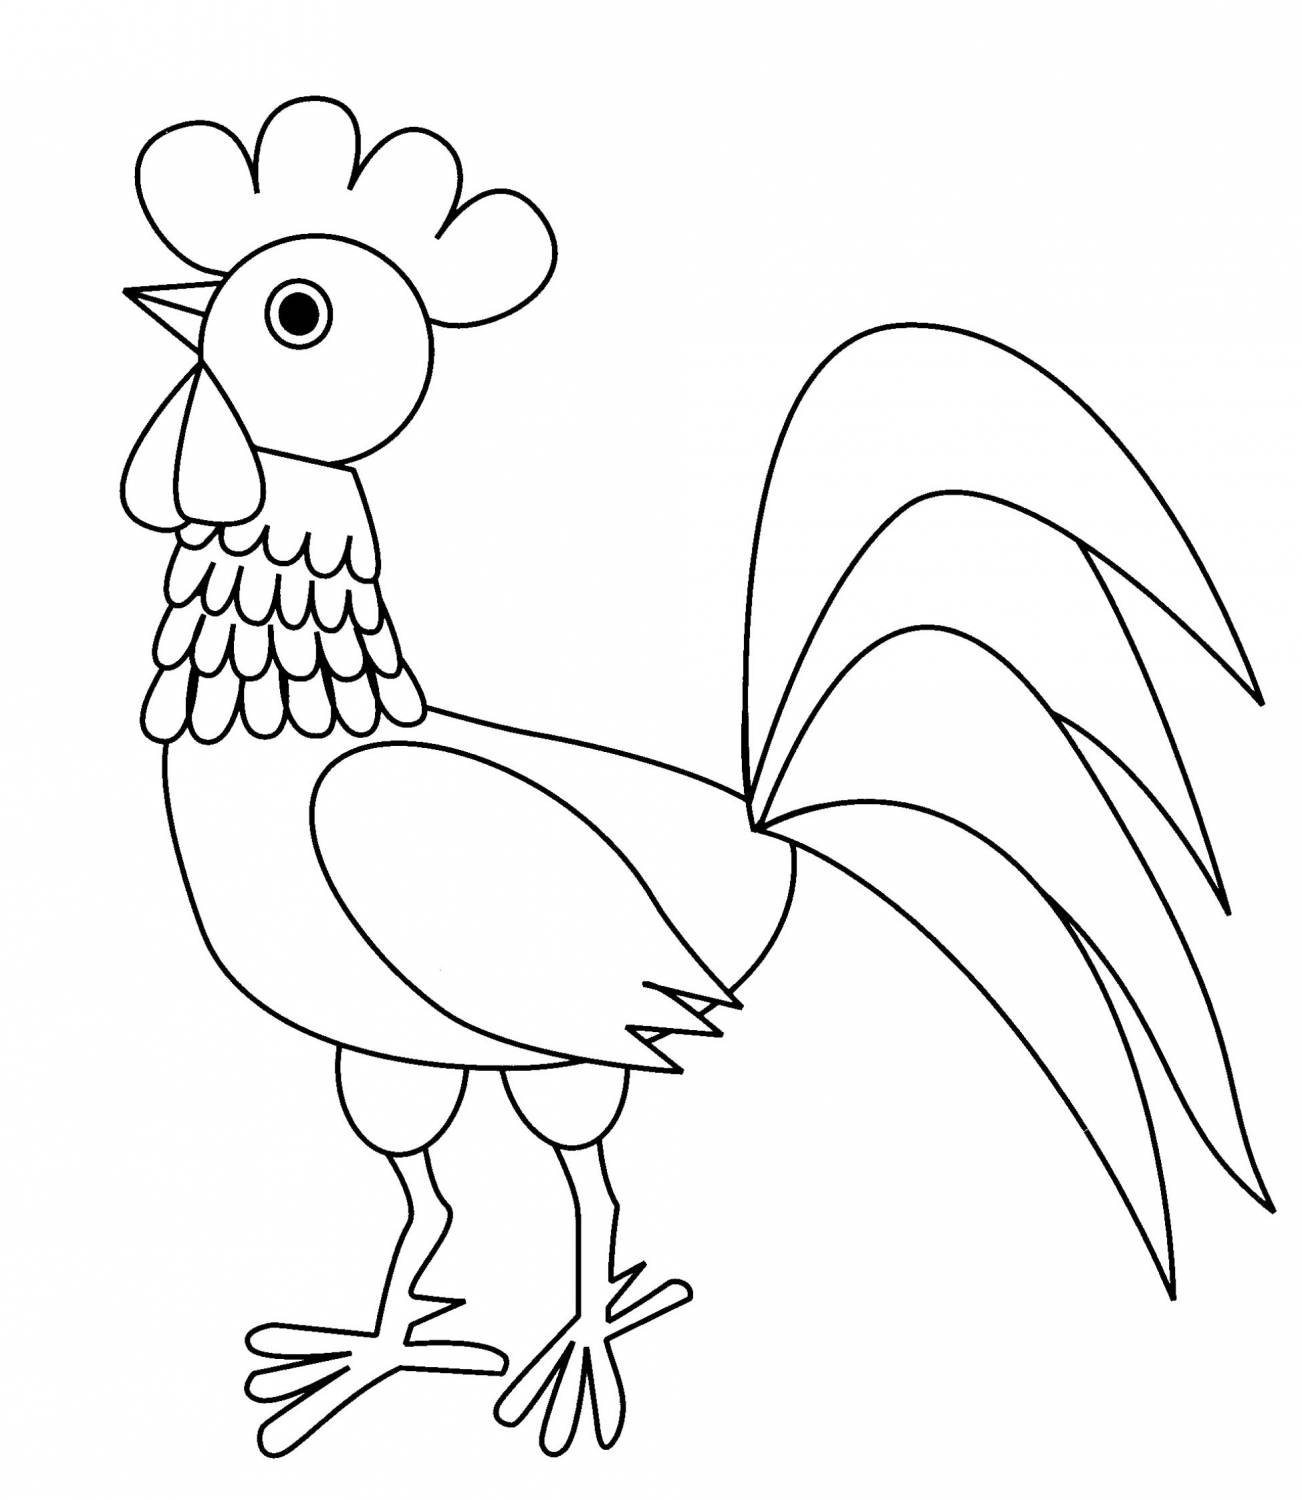 Fat cock coloring book for kids